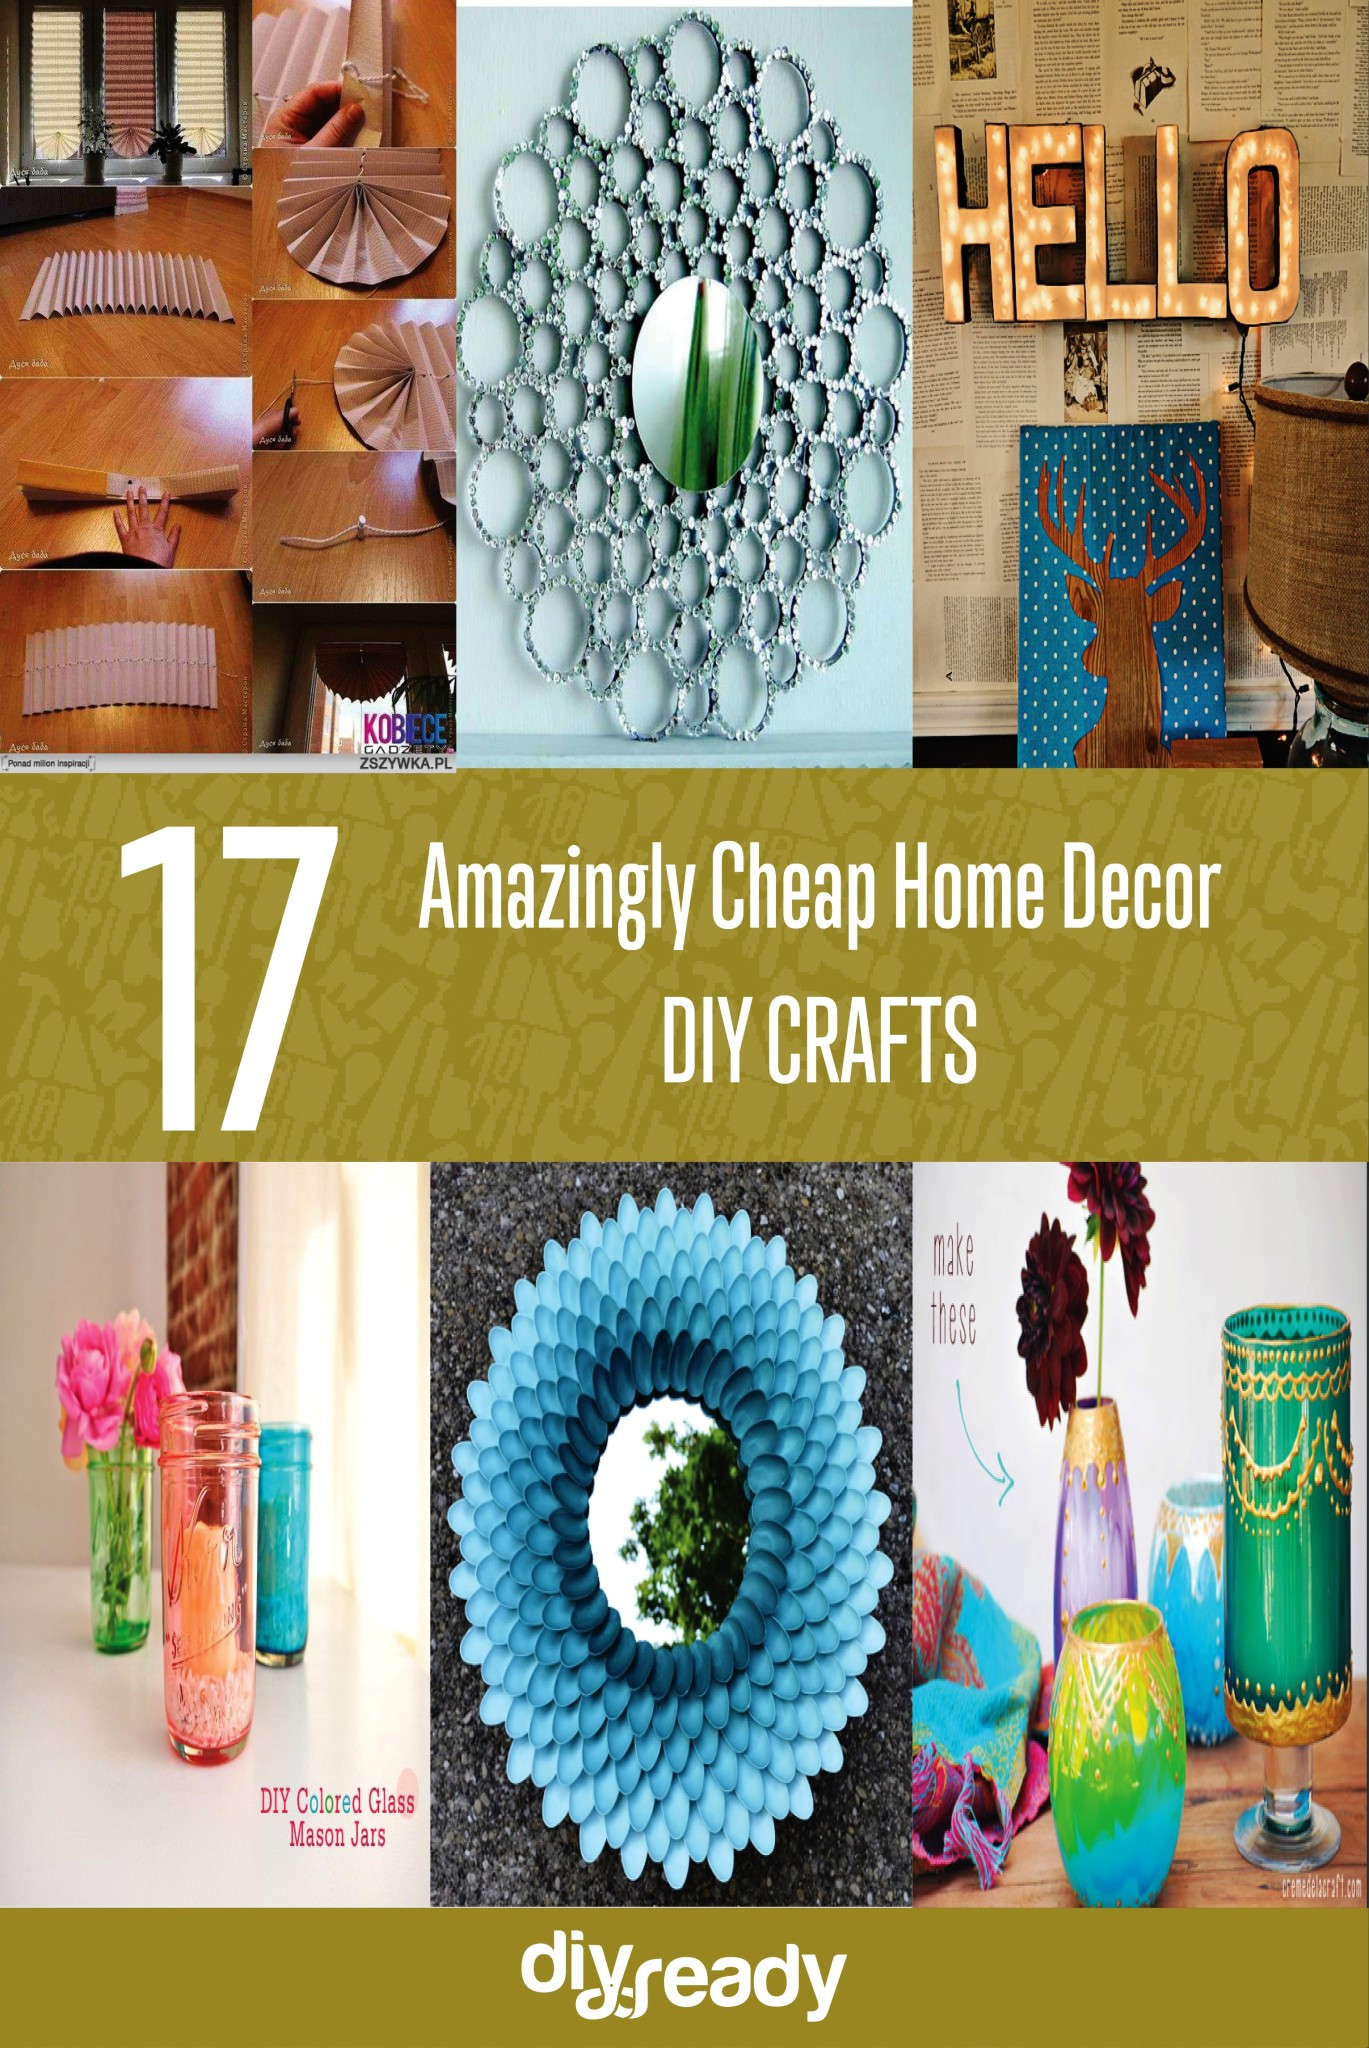 DIY Crafts Ideas For Home Decor
 Cheap Home Decor Ideas DIY Projects Craft Ideas & How To’s